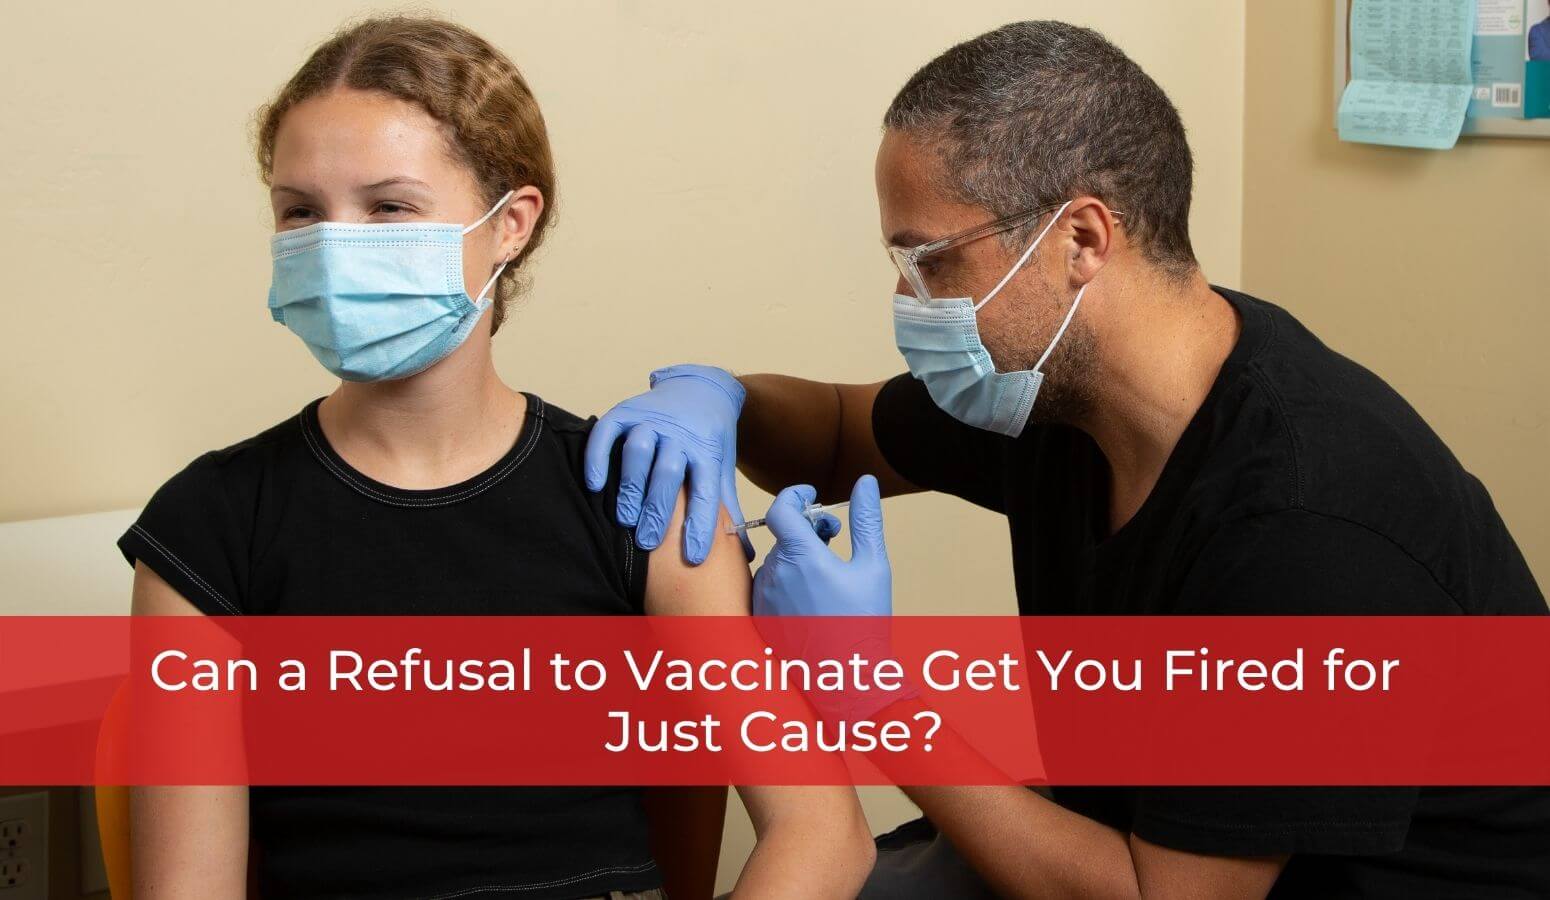 Can a Refusal to Vaccinate Get You Fired for Just Cause?